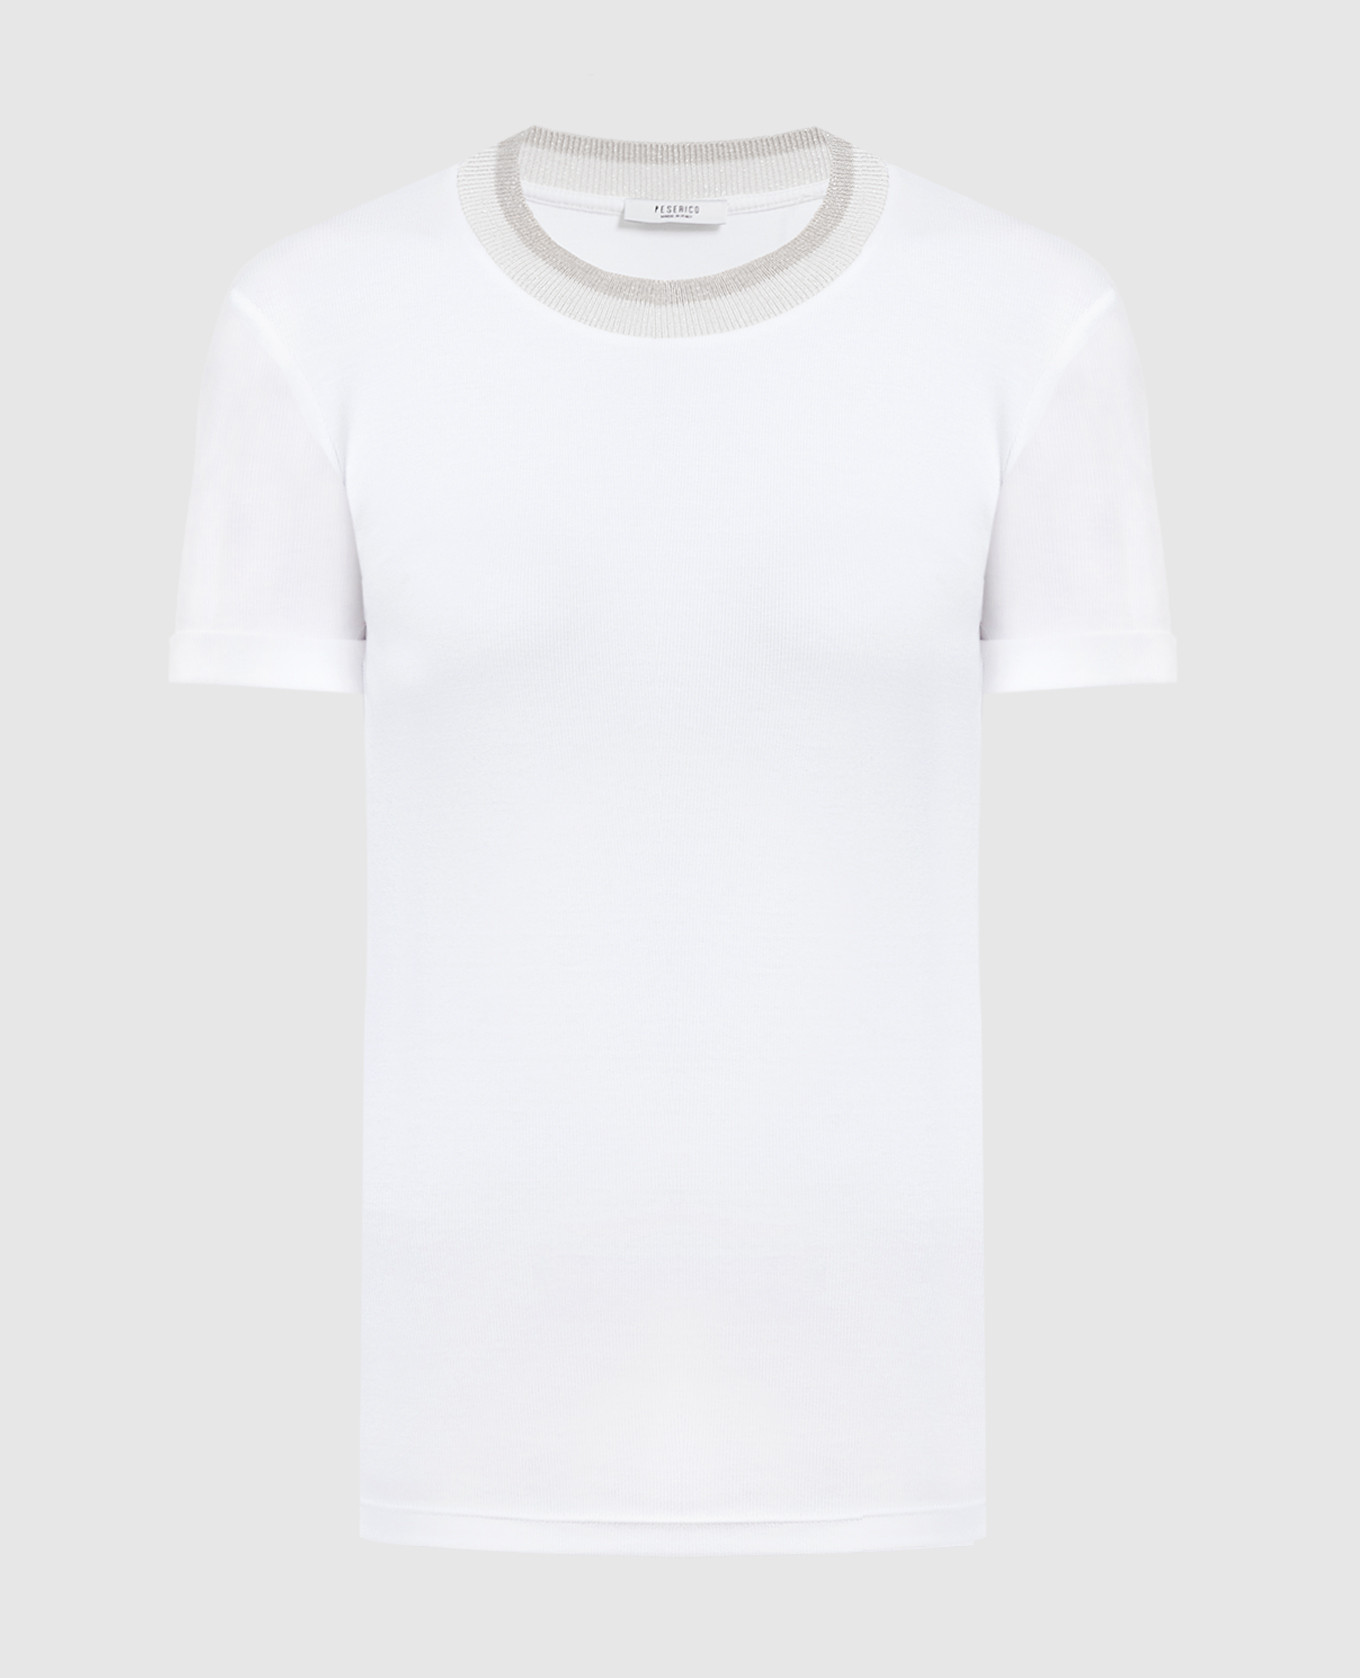 White t-shirt with a scar